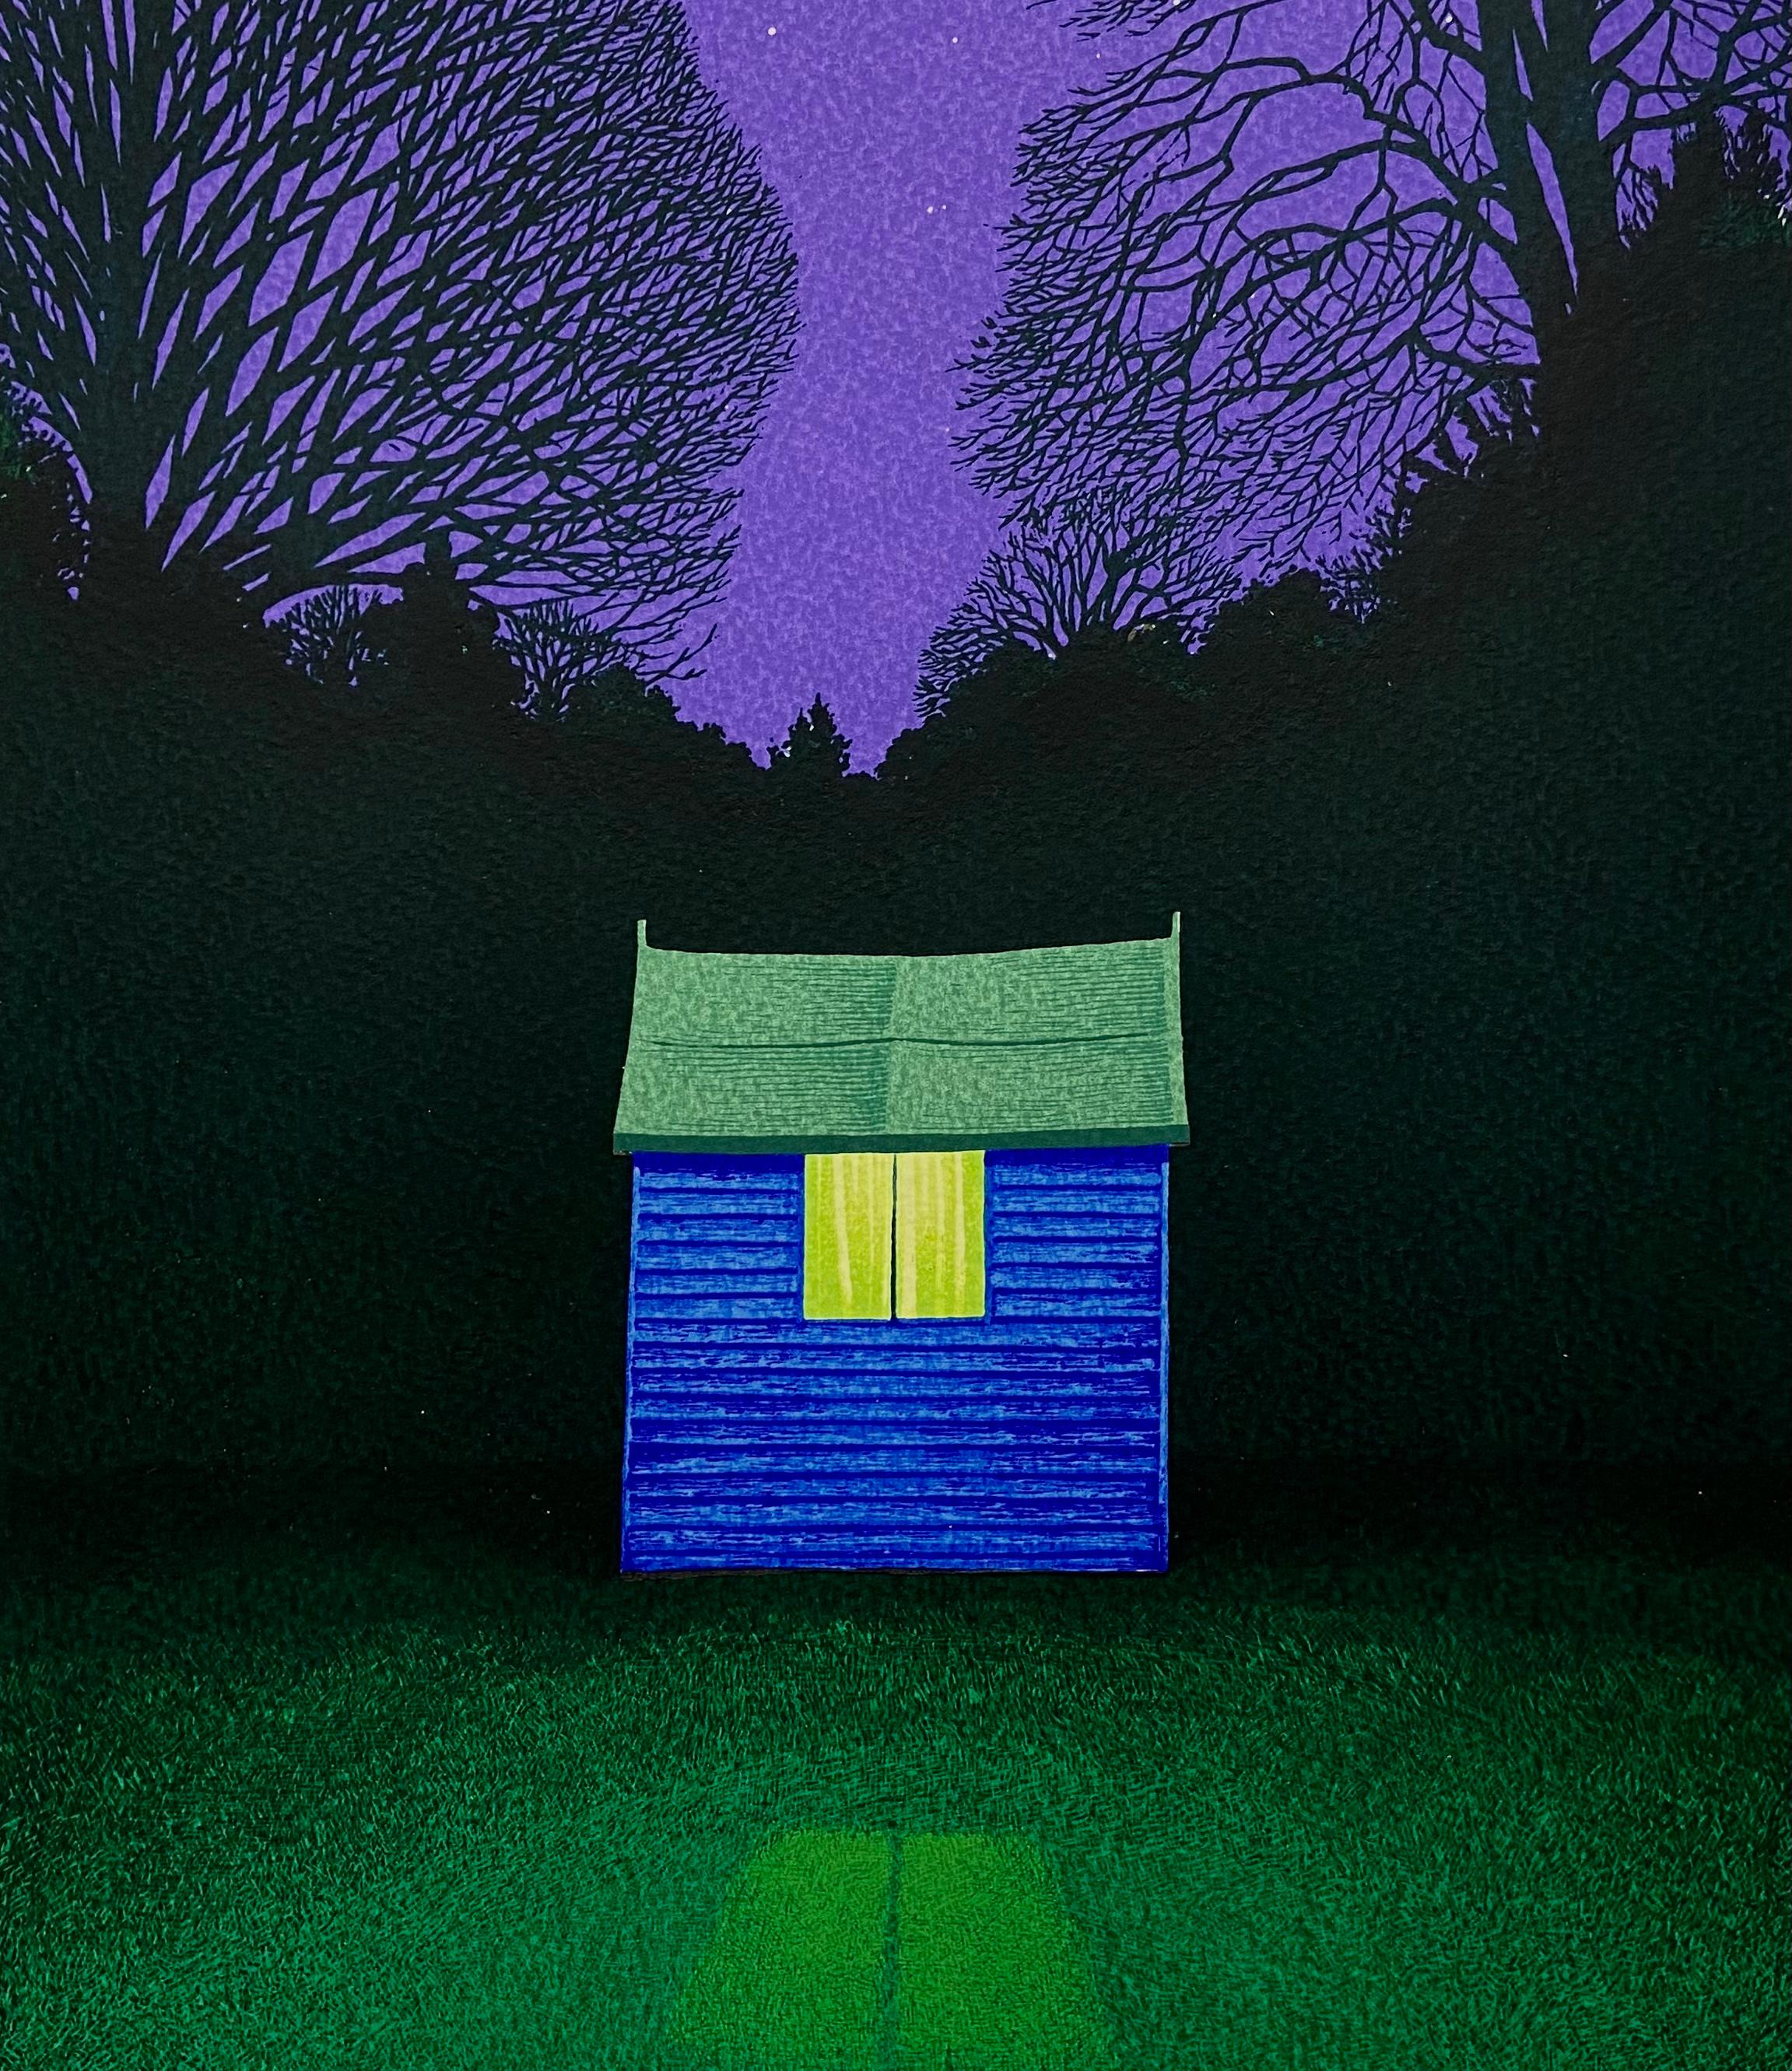 Martin Grover, Blue Shed, Screen print, Edition of 25, 38cm x 56cm.